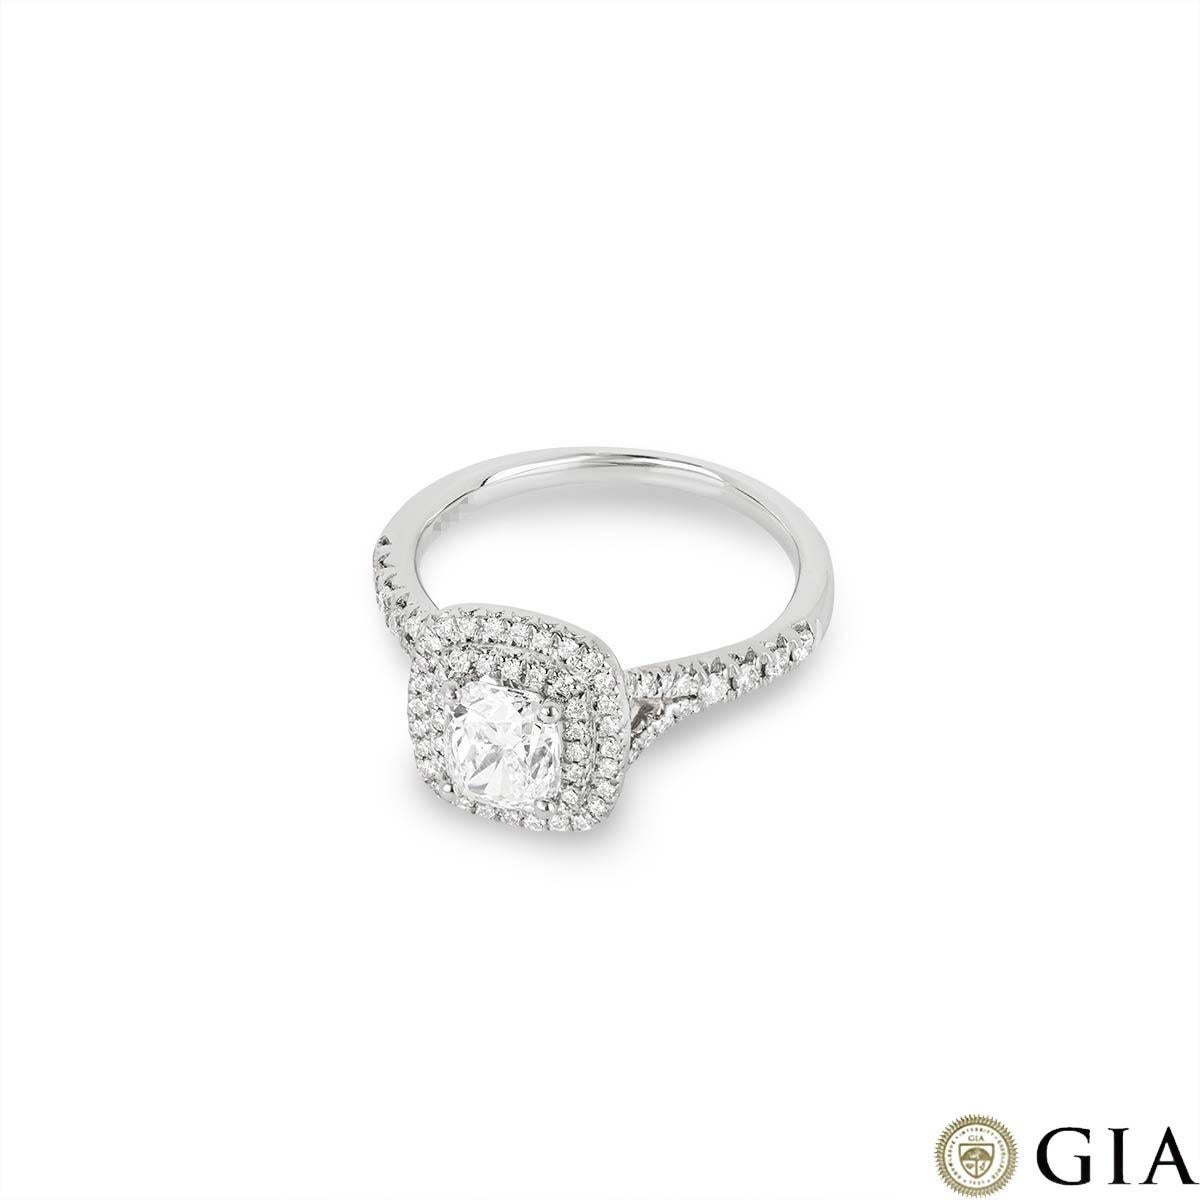 GIA Certified Platinum Cushion Cut Diamond Ring 1.01ct D/SI2 In Excellent Condition For Sale In London, GB